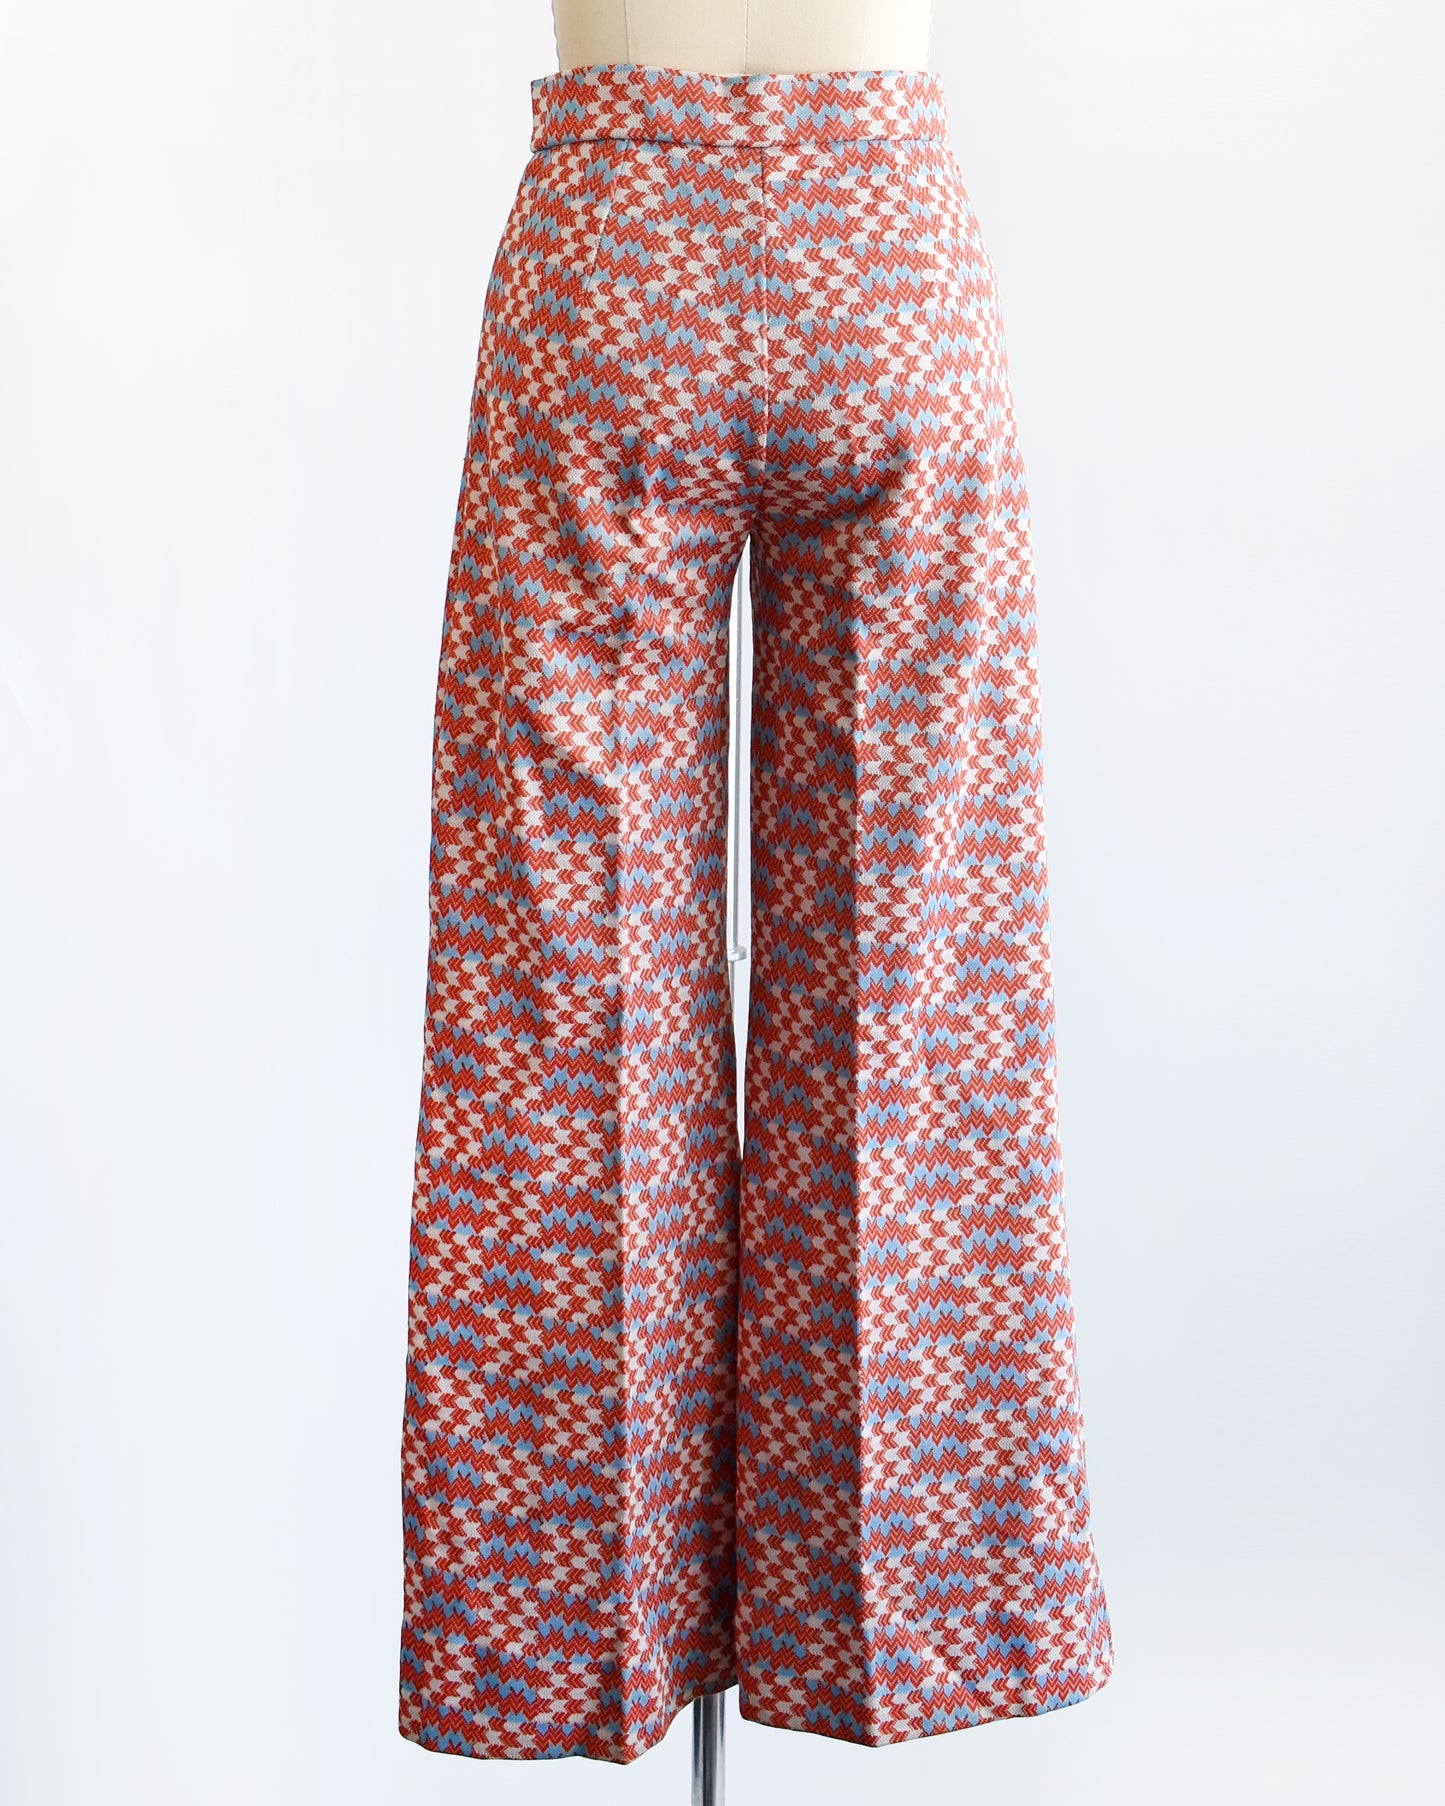 back view of  a vintage 1970s wide leg pants feature a vibrant print with dark orange, white, and light blue arrows pointing in various directions down the legs.